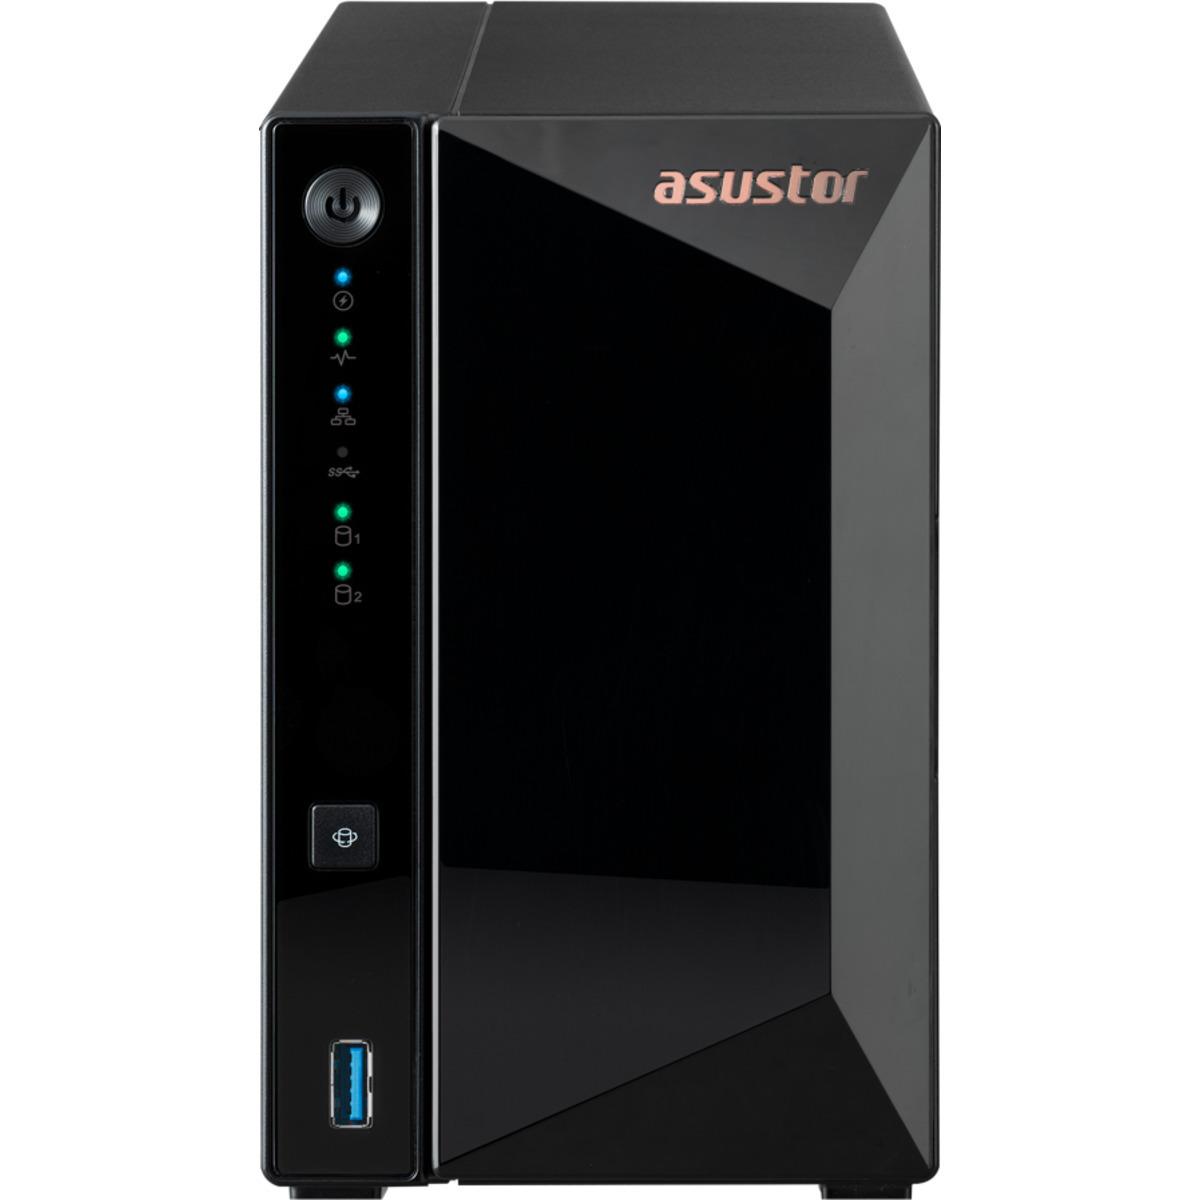 buy ASUSTOR DRIVESTOR 2 Pro AS3302T 32tb Desktop NAS - Network Attached Storage Device 2x16000gb Seagate IronWolf Pro ST16000NT001 3.5 7200rpm SATA 6Gb/s HDD NAS Class Drives Installed - Burn-In Tested - ON SALE - nas headquarters buy network attached storage server device das new raid-5 free shipping simply usa christmas holiday black friday cyber monday week sale happening now! DRIVESTOR 2 Pro AS3302T